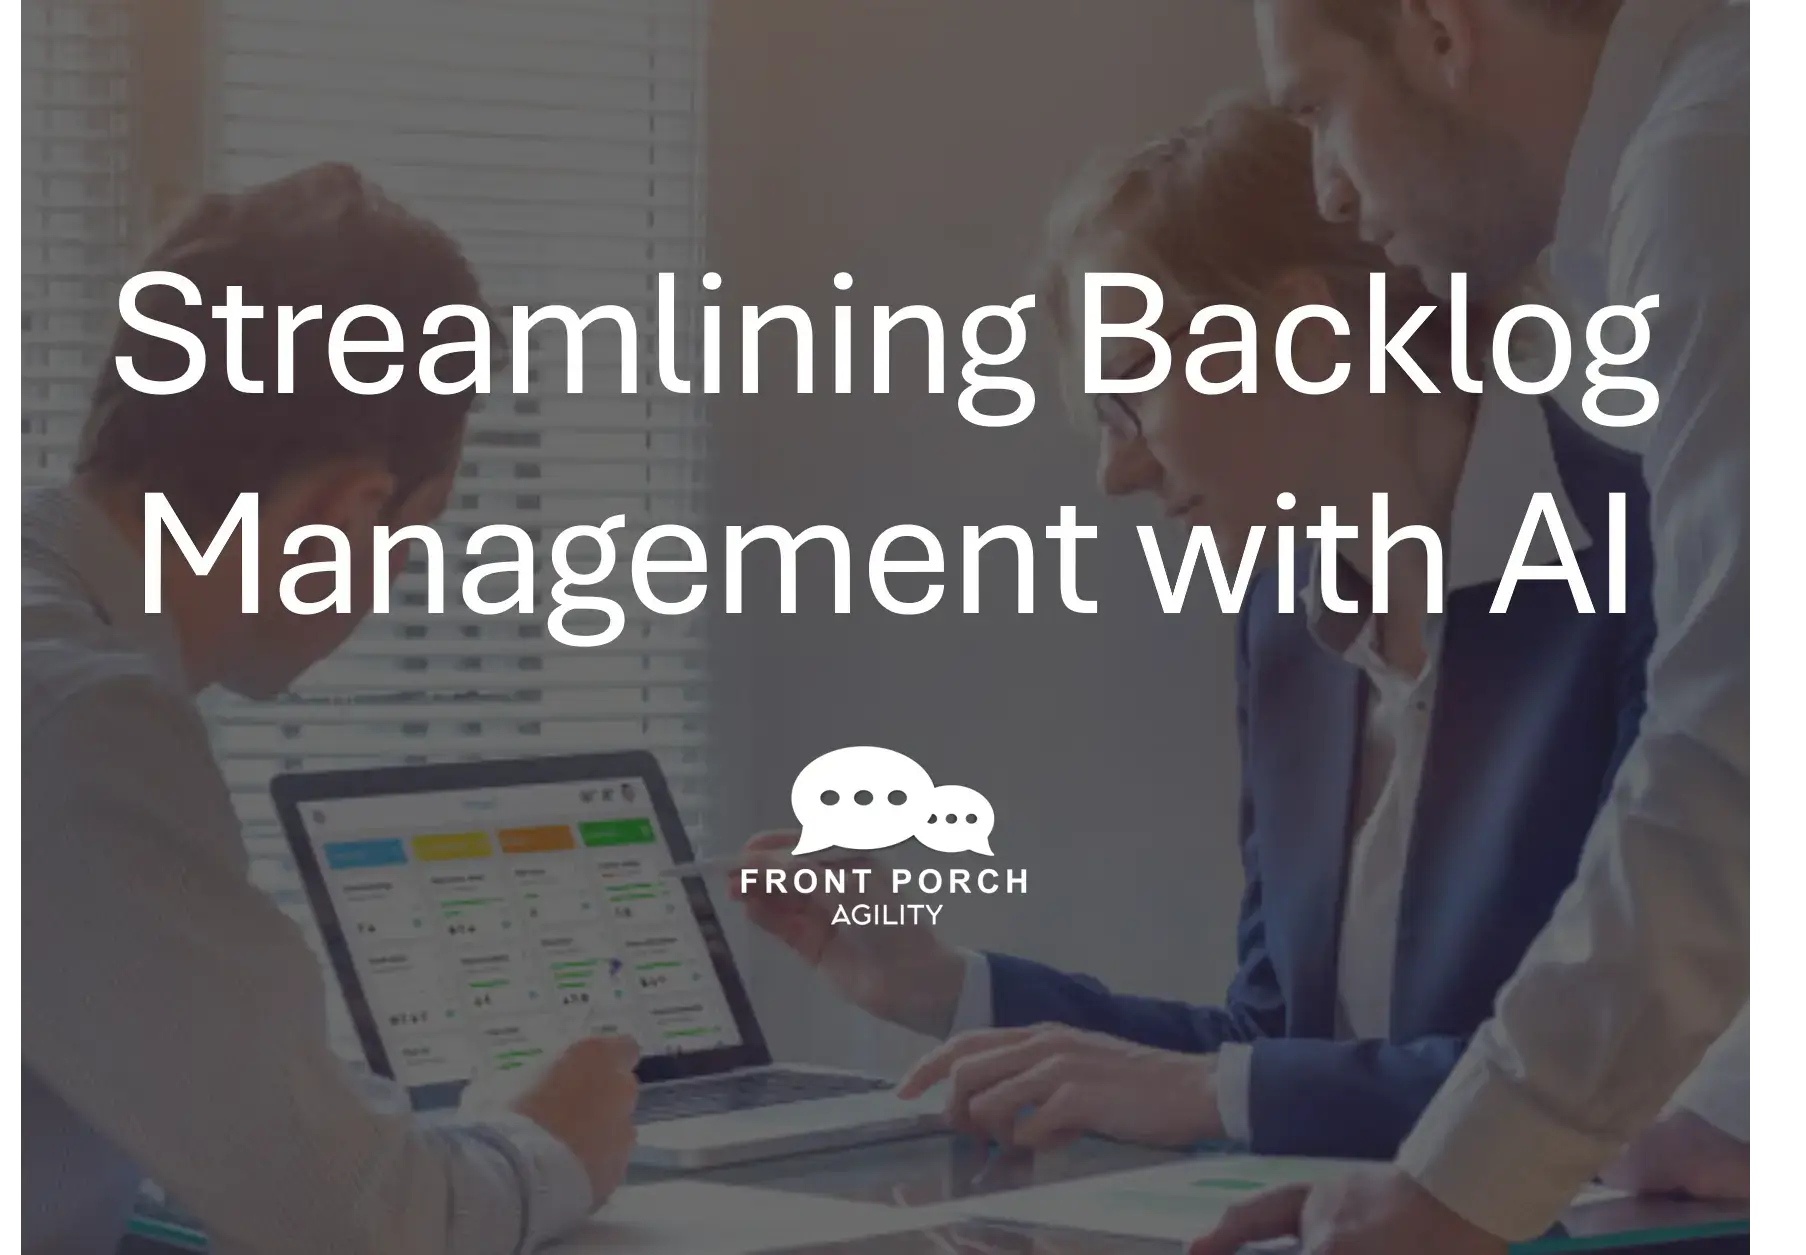 Backlog Management with AI